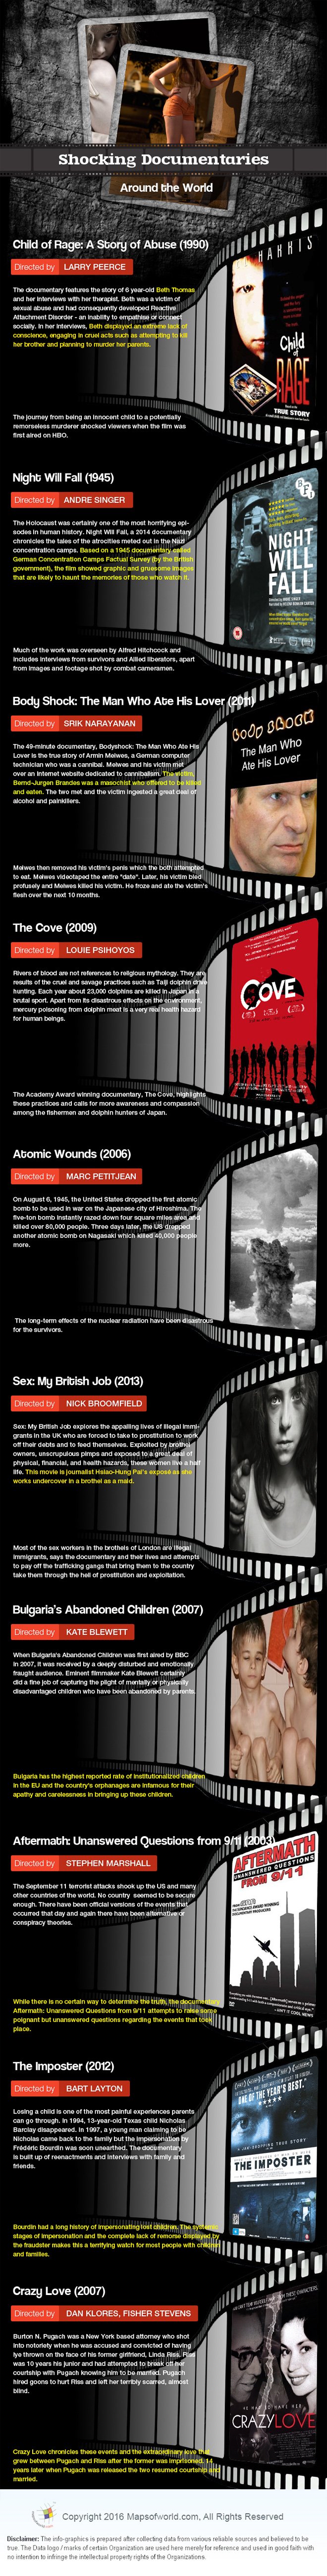 Infographic on Just Shocking Documentaries